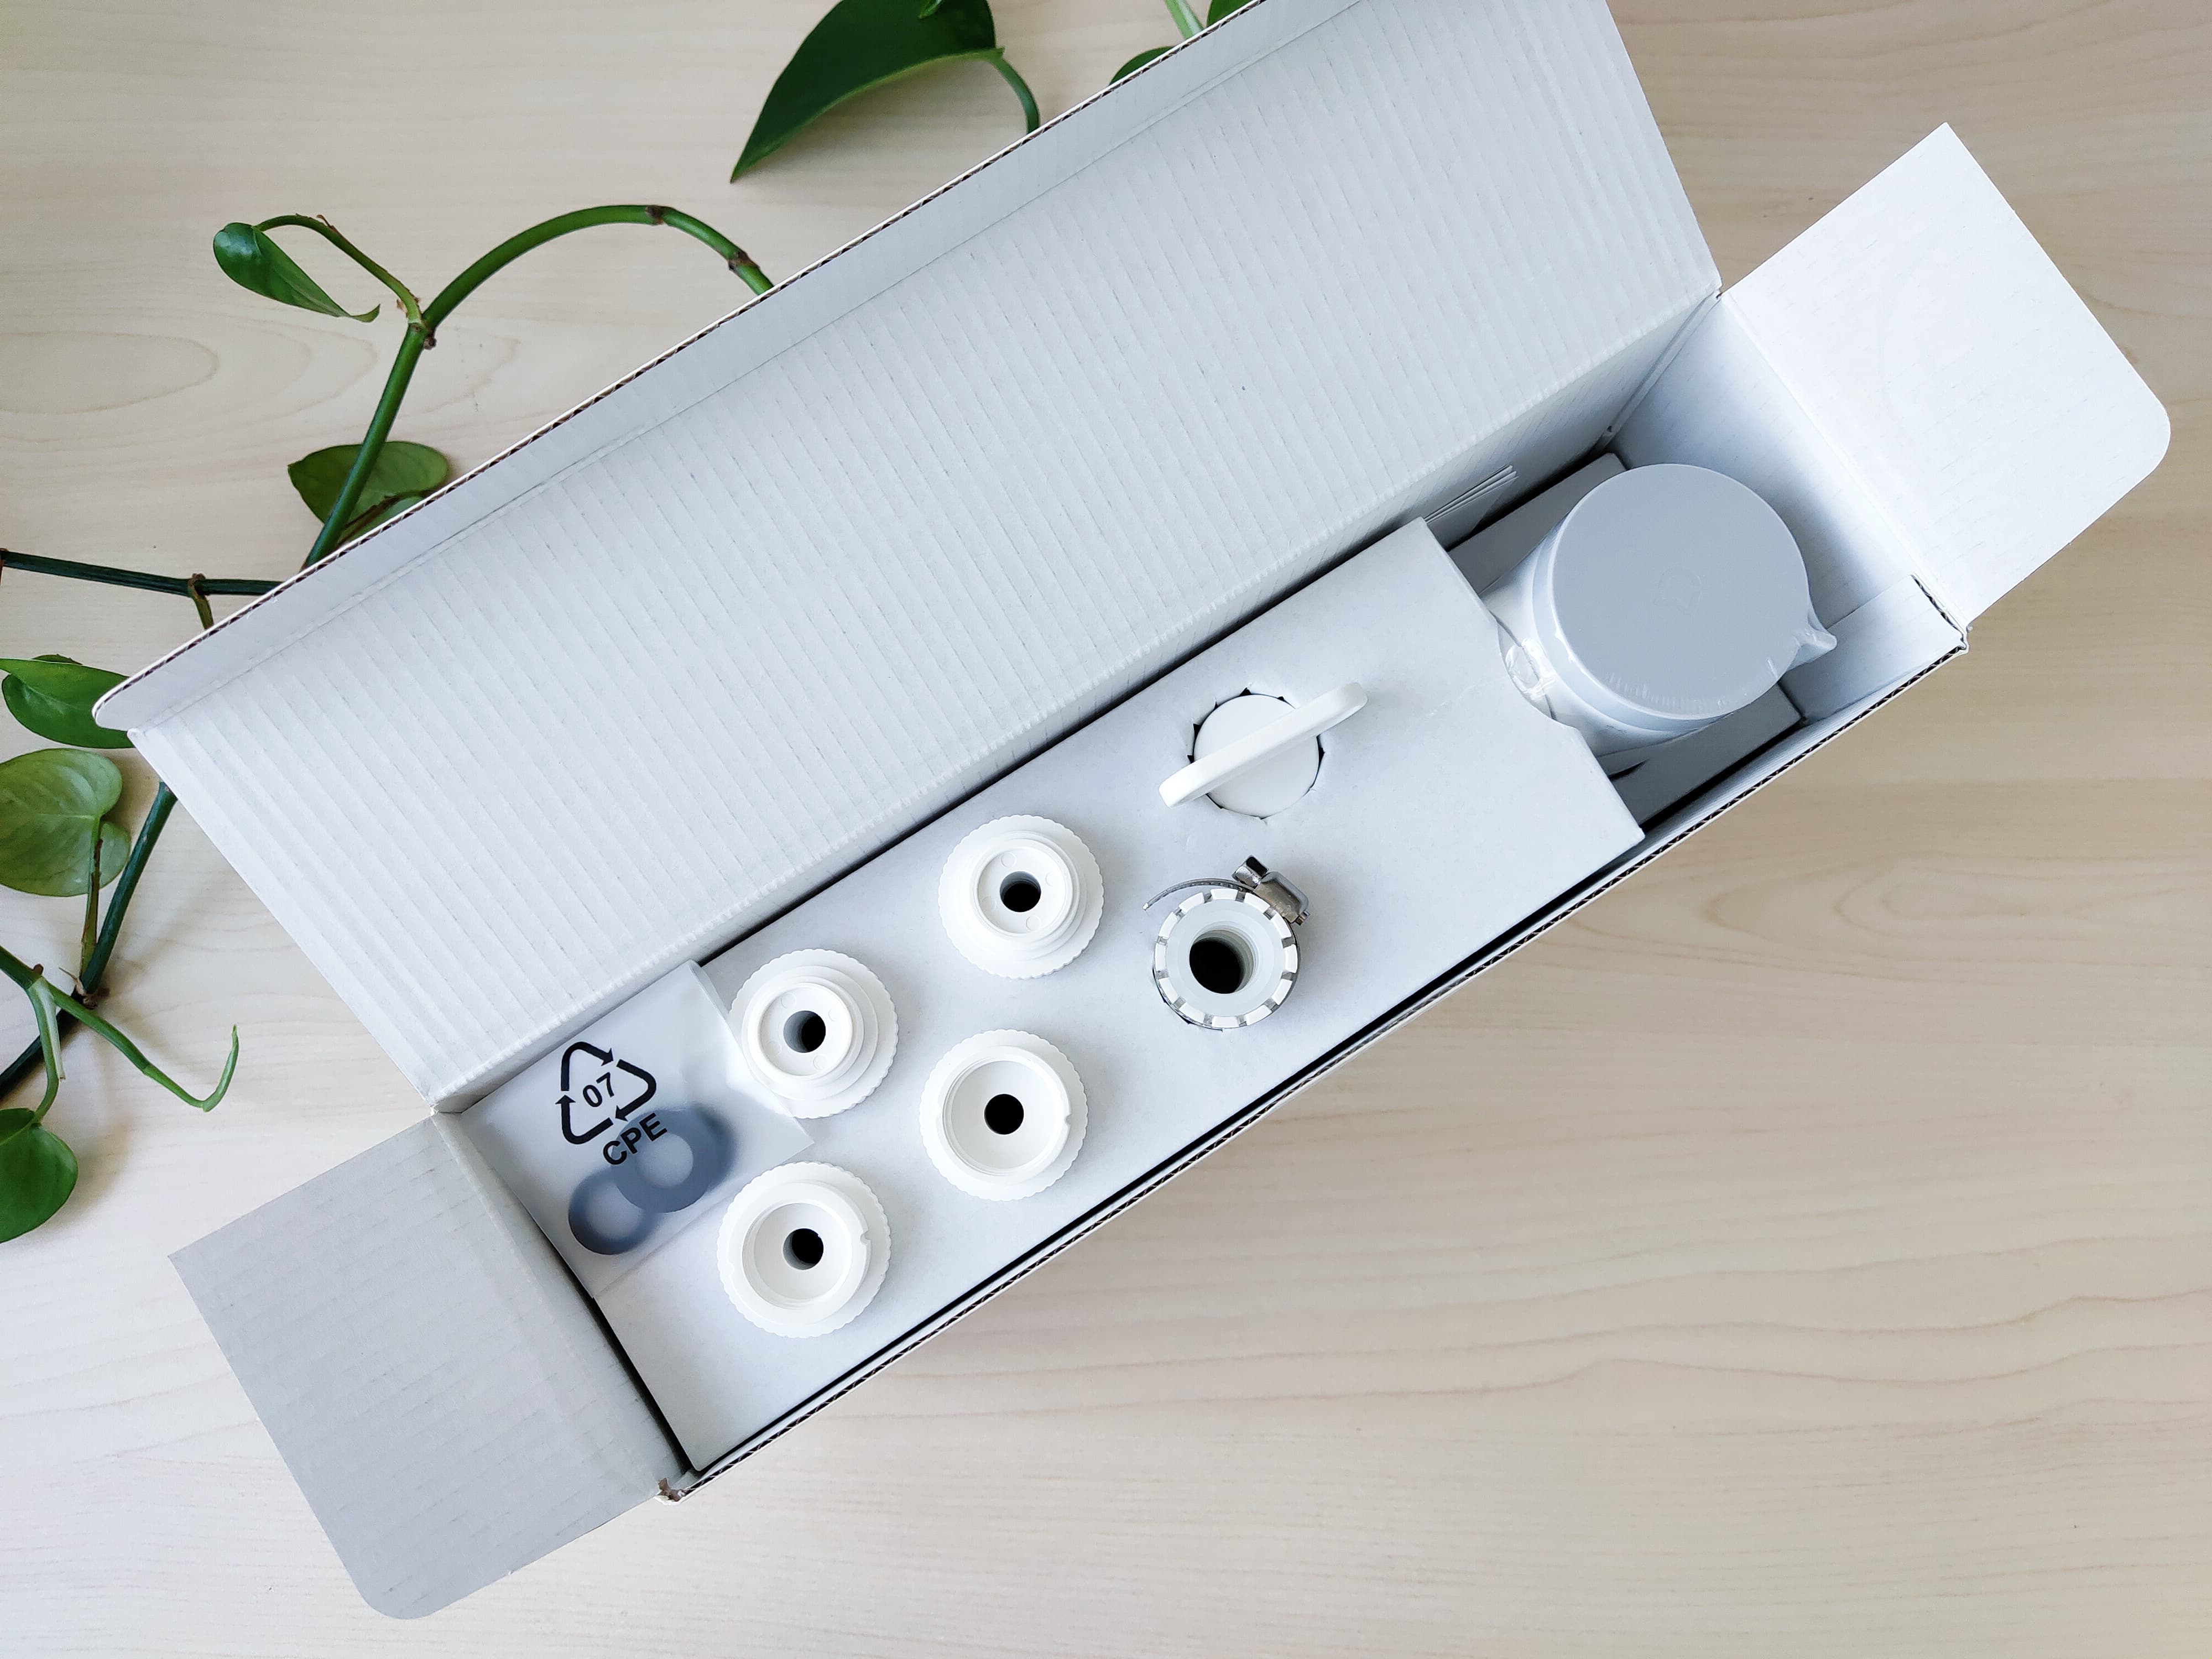 Mijia faucet water purifier out of the box: drinking water with four-fold filtration